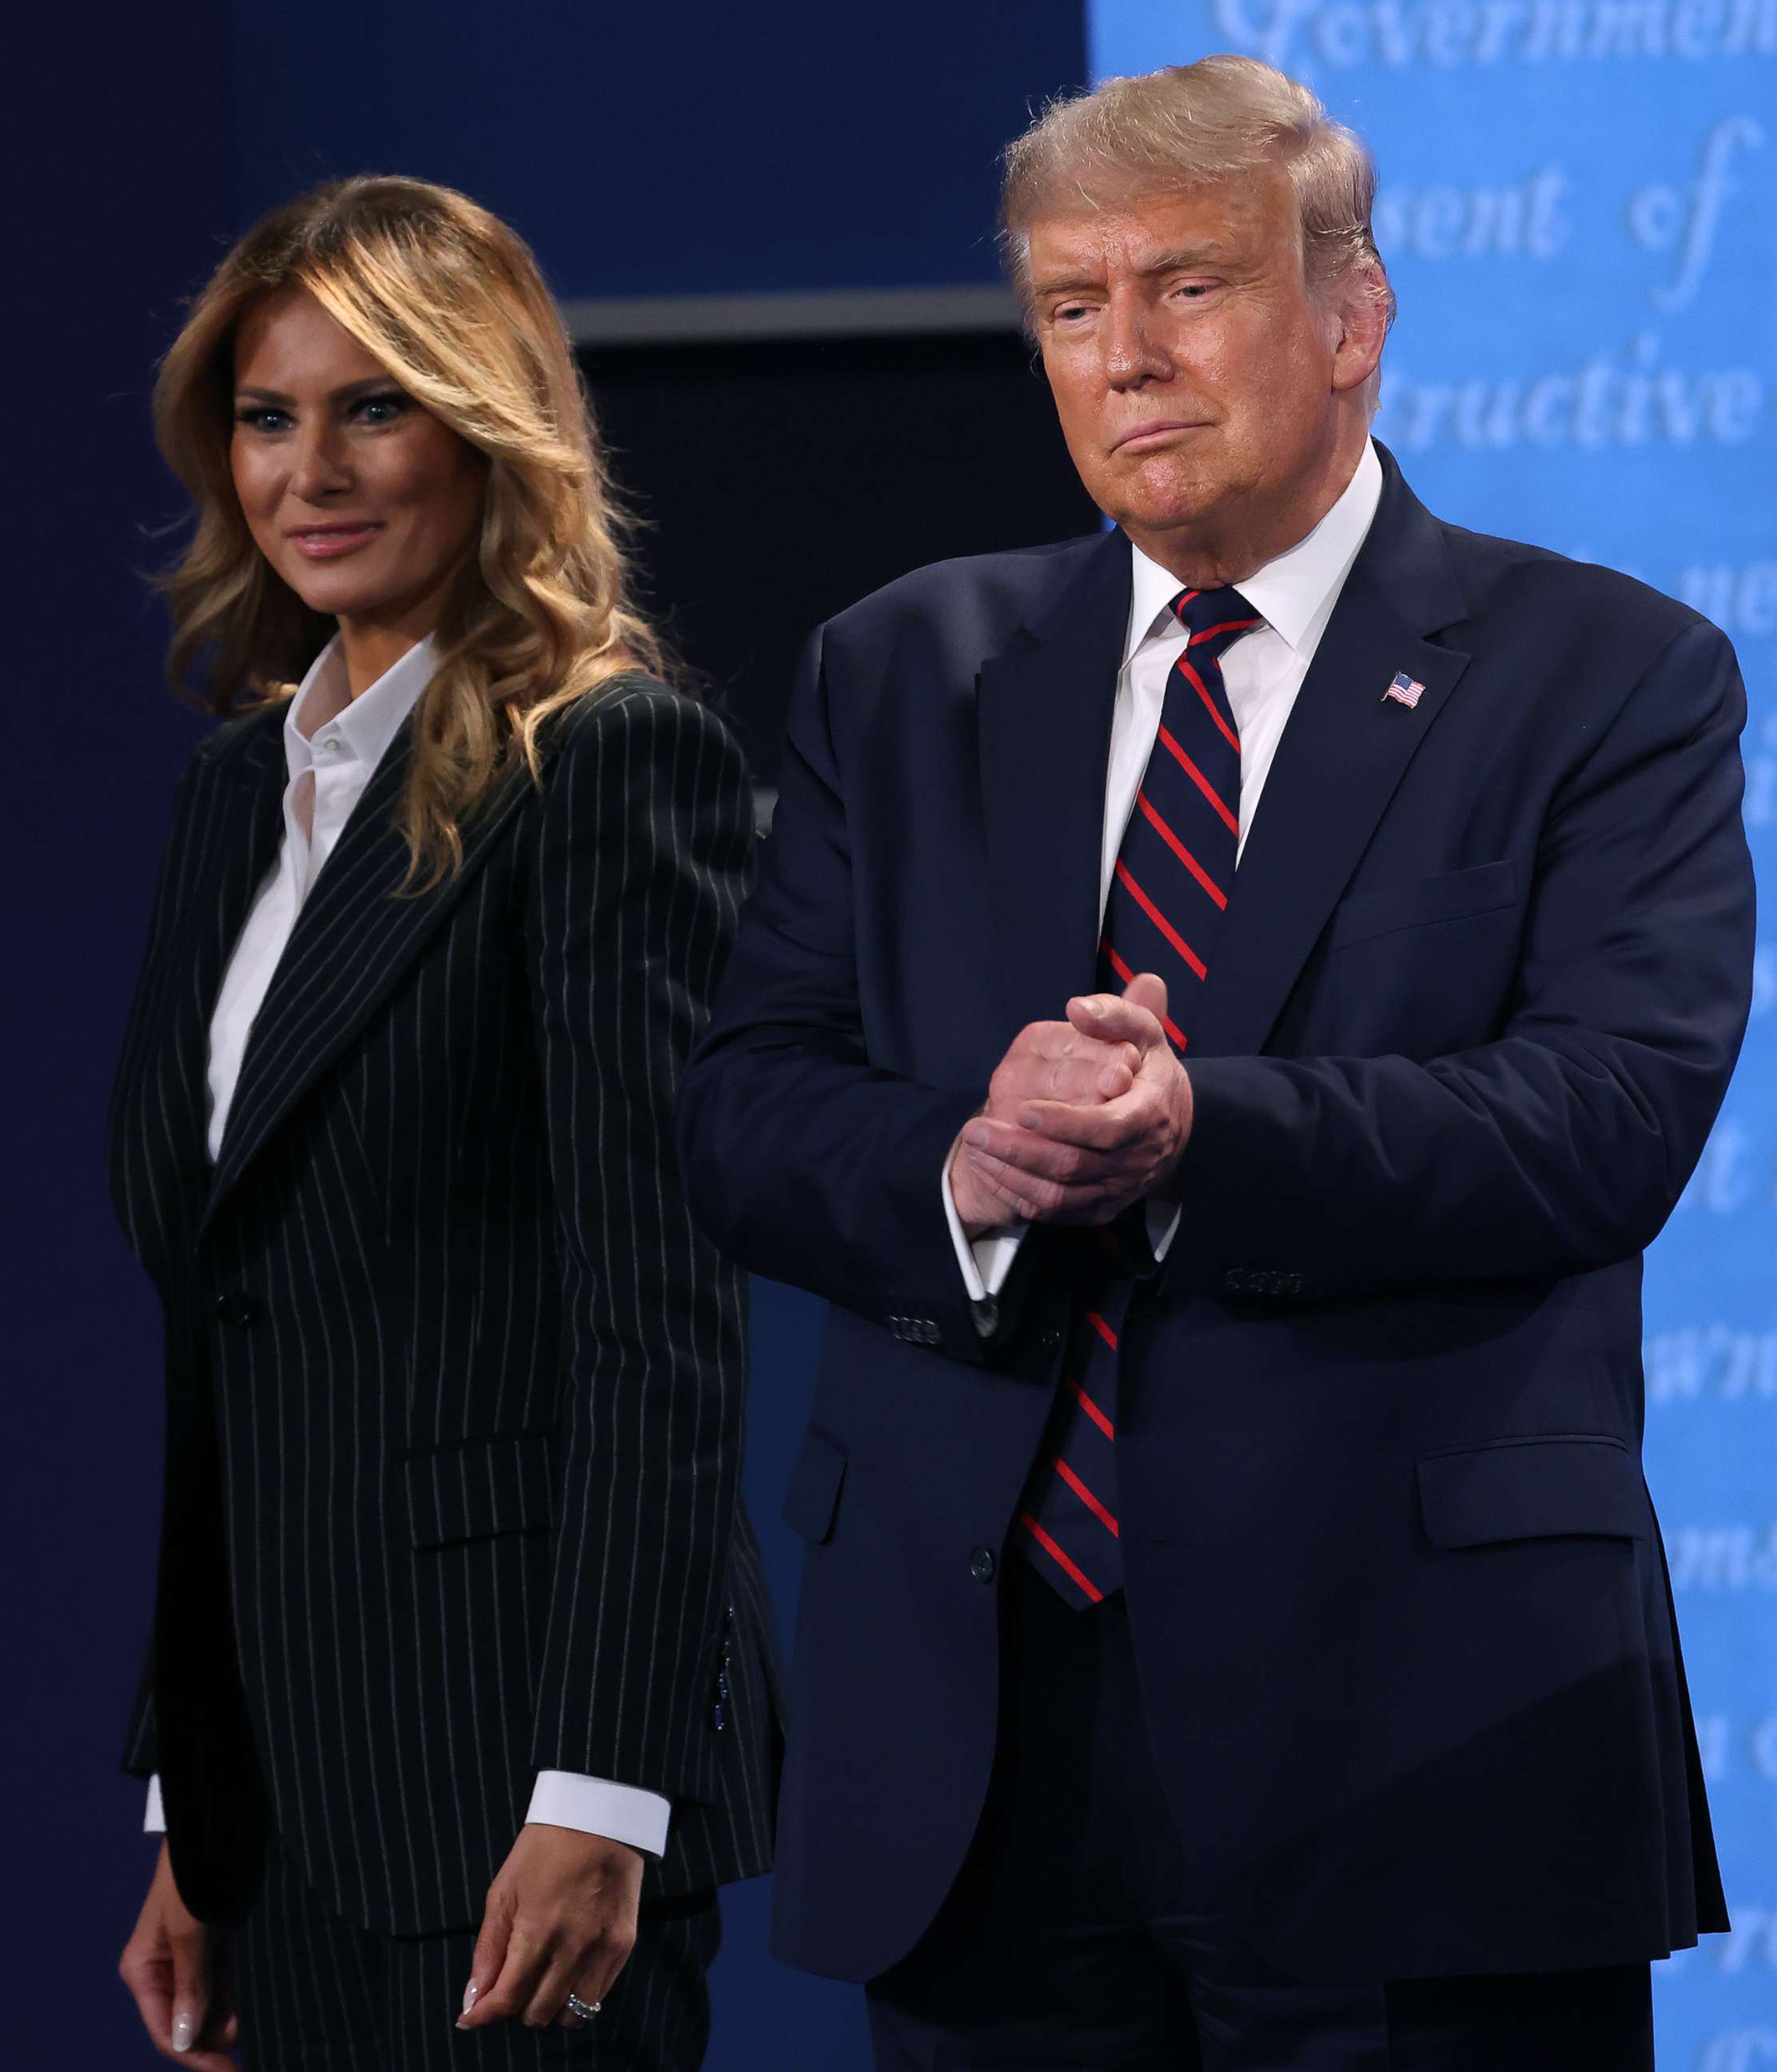 PHOTO: President Donald Trump and first lady Melania Trump on stage after the first presidential debate between Trump and Democratic presidential nominee Joe Biden, Sept. 29, 2020, in Cleveland.